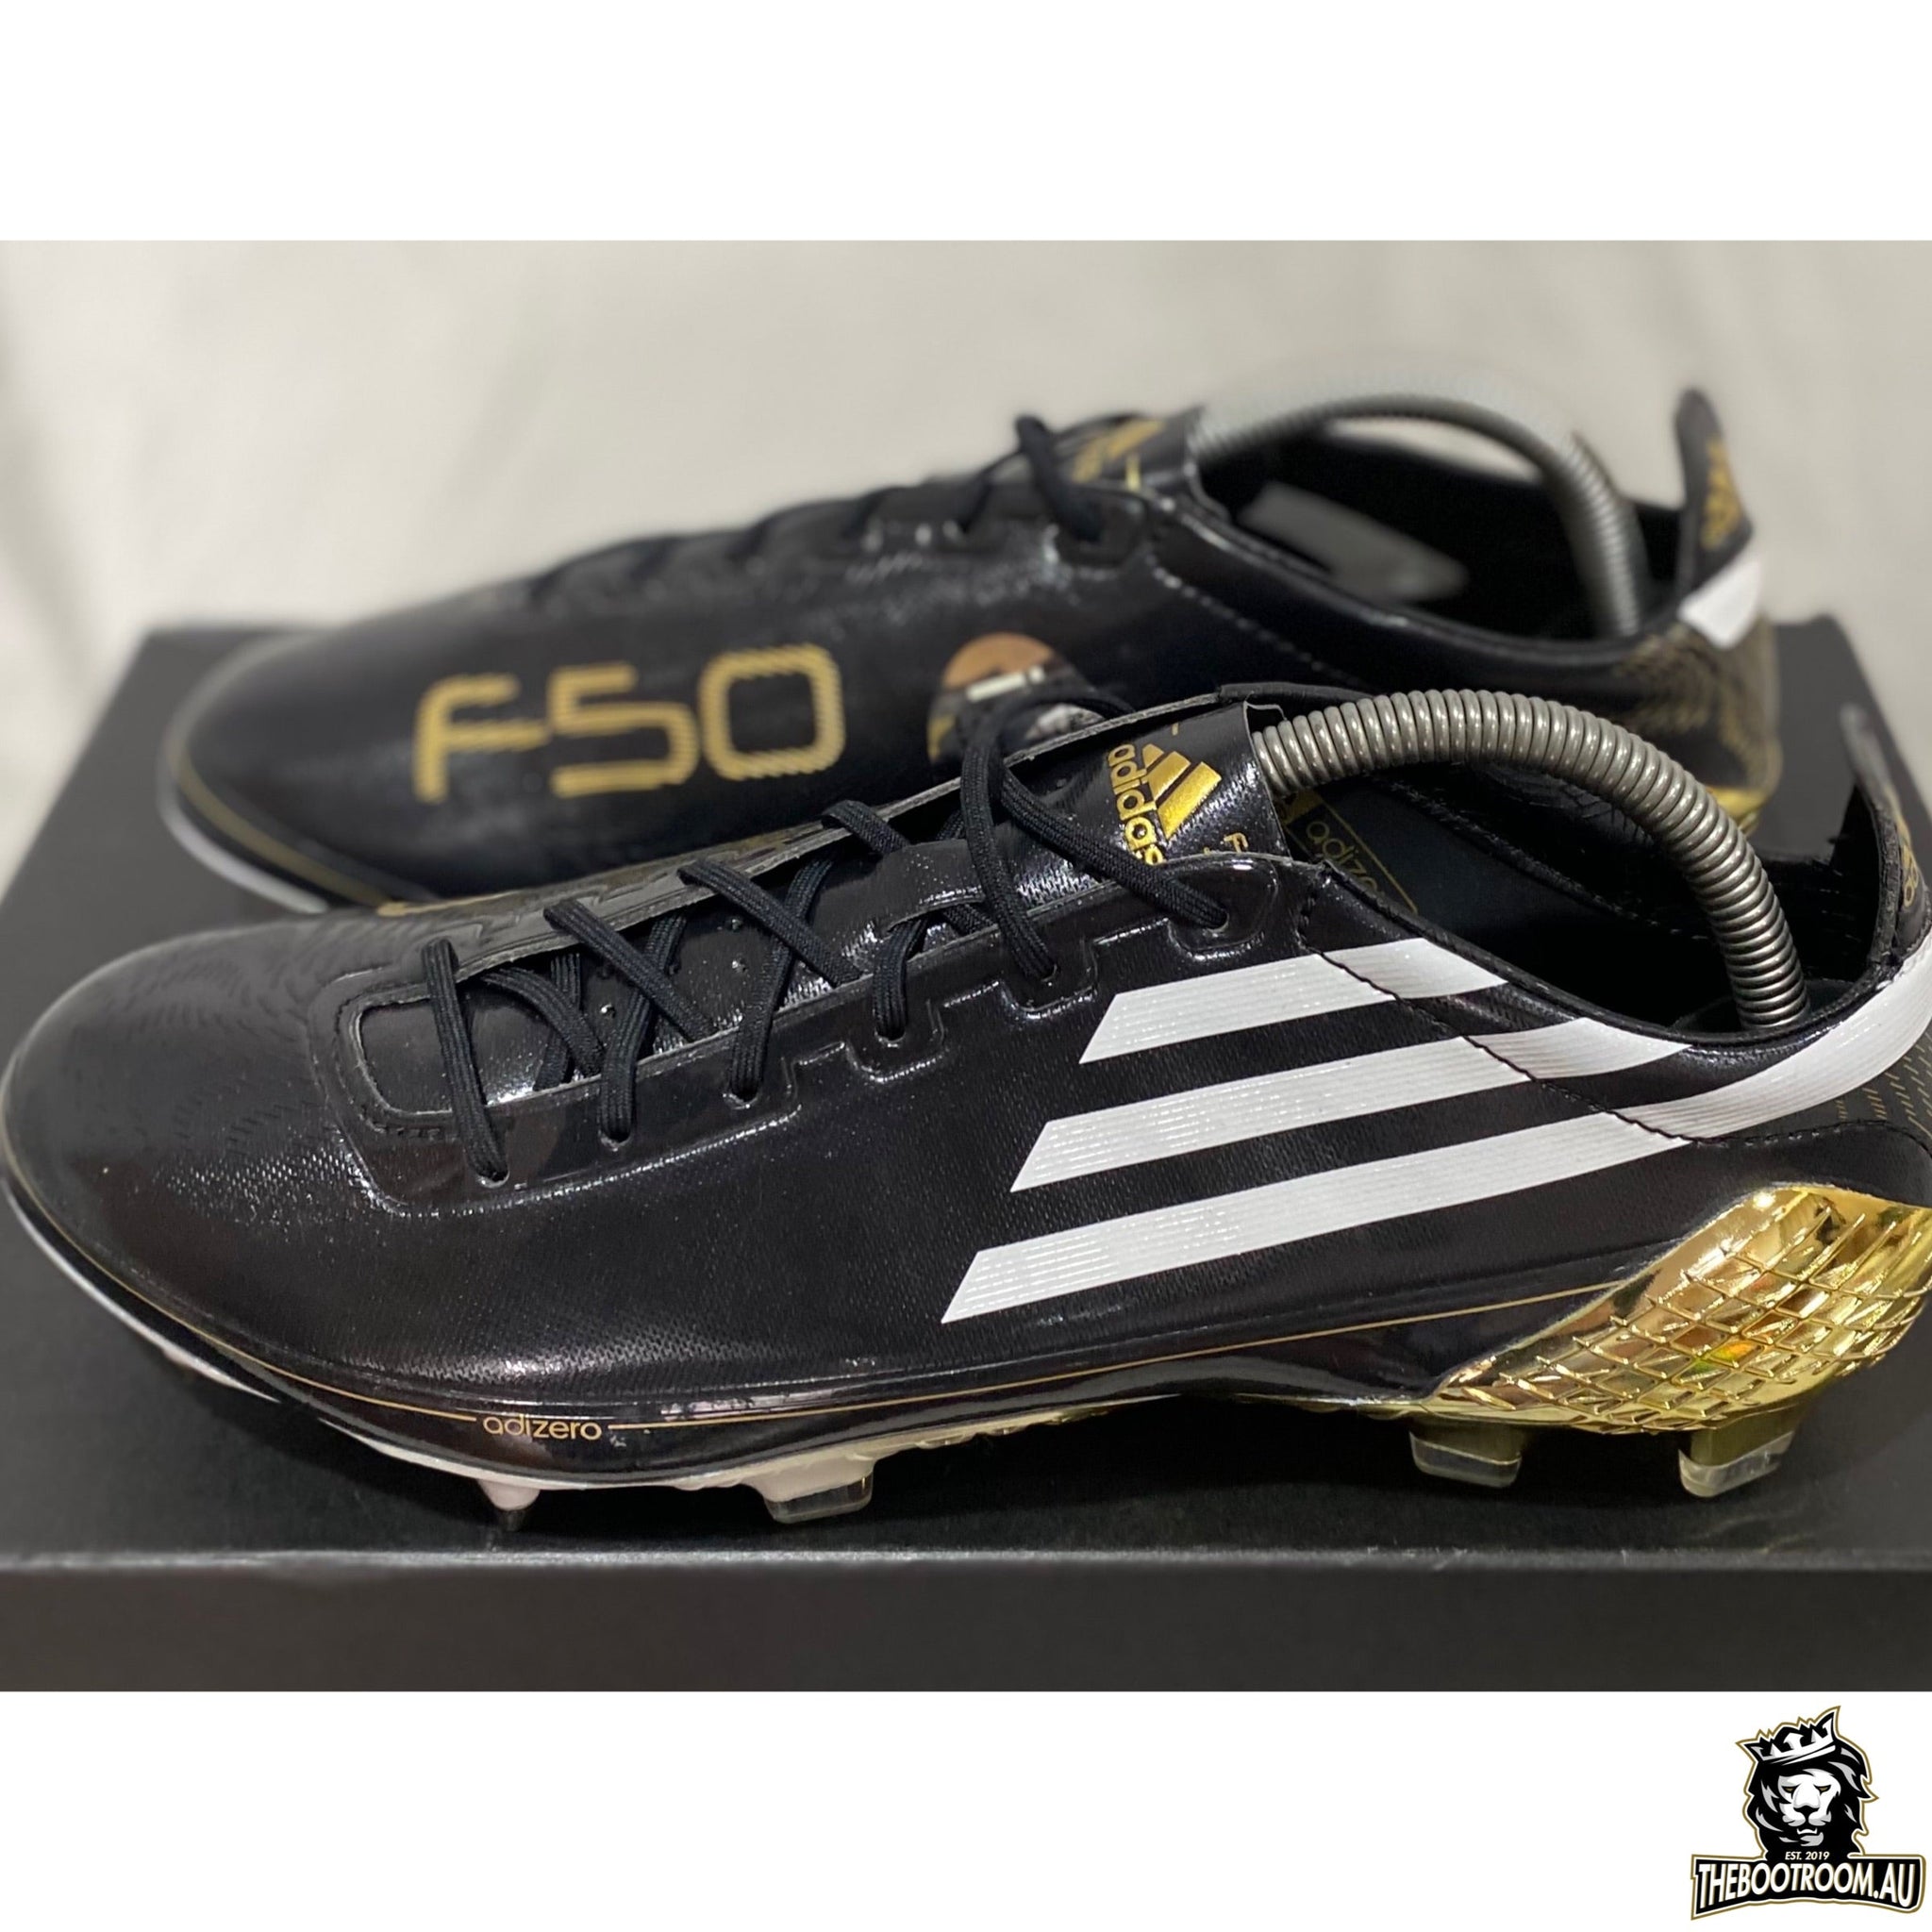 ADIDAS f50 GHOSTED “EA SPORTS”